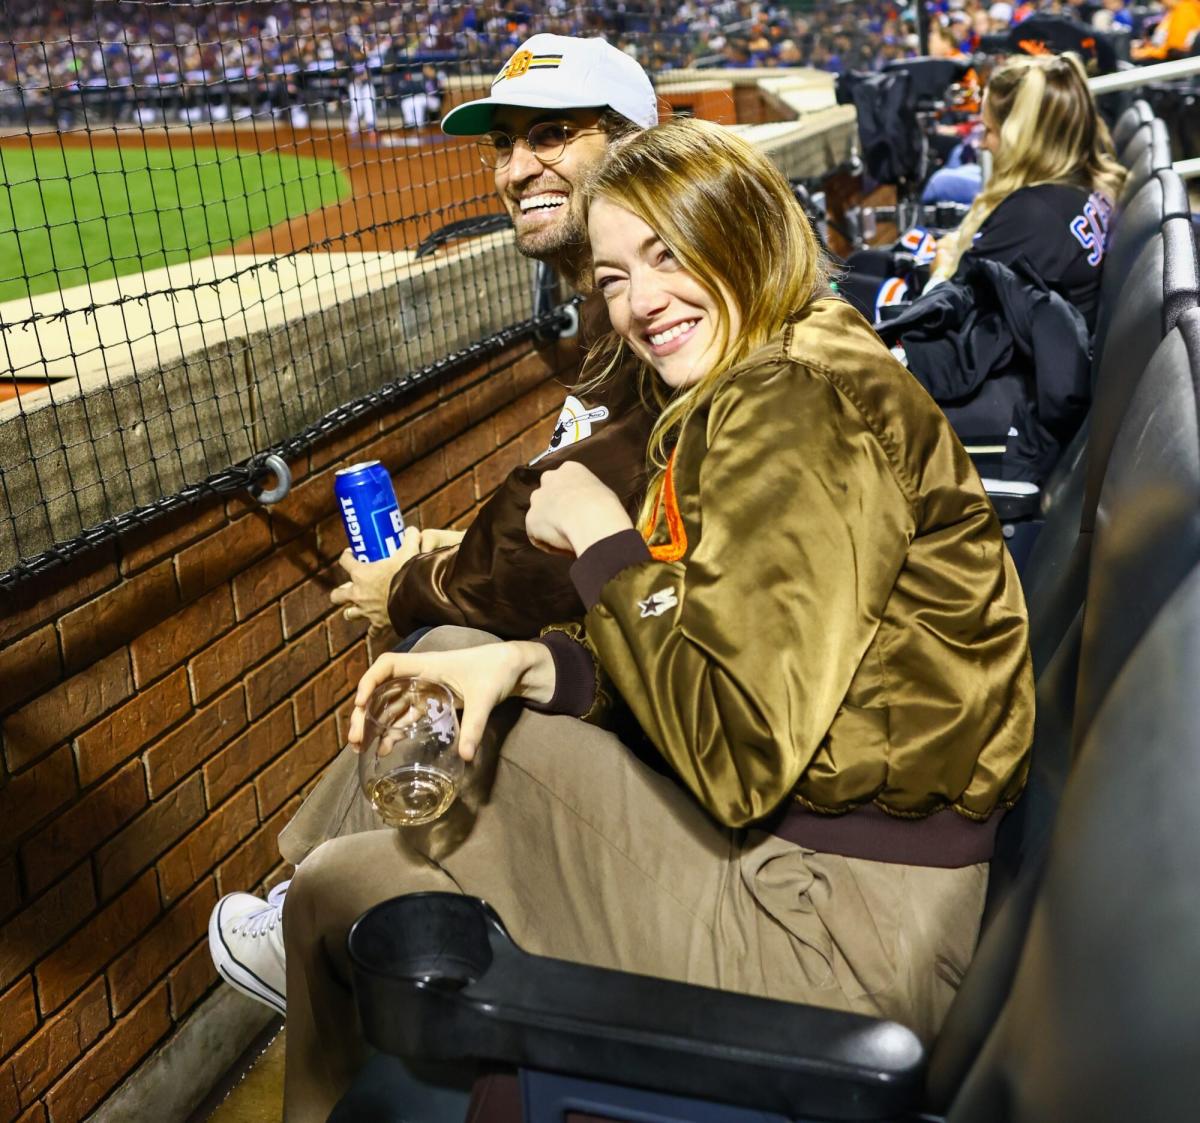 Watch Emma Stone Get Booed at Padres-Mets Game